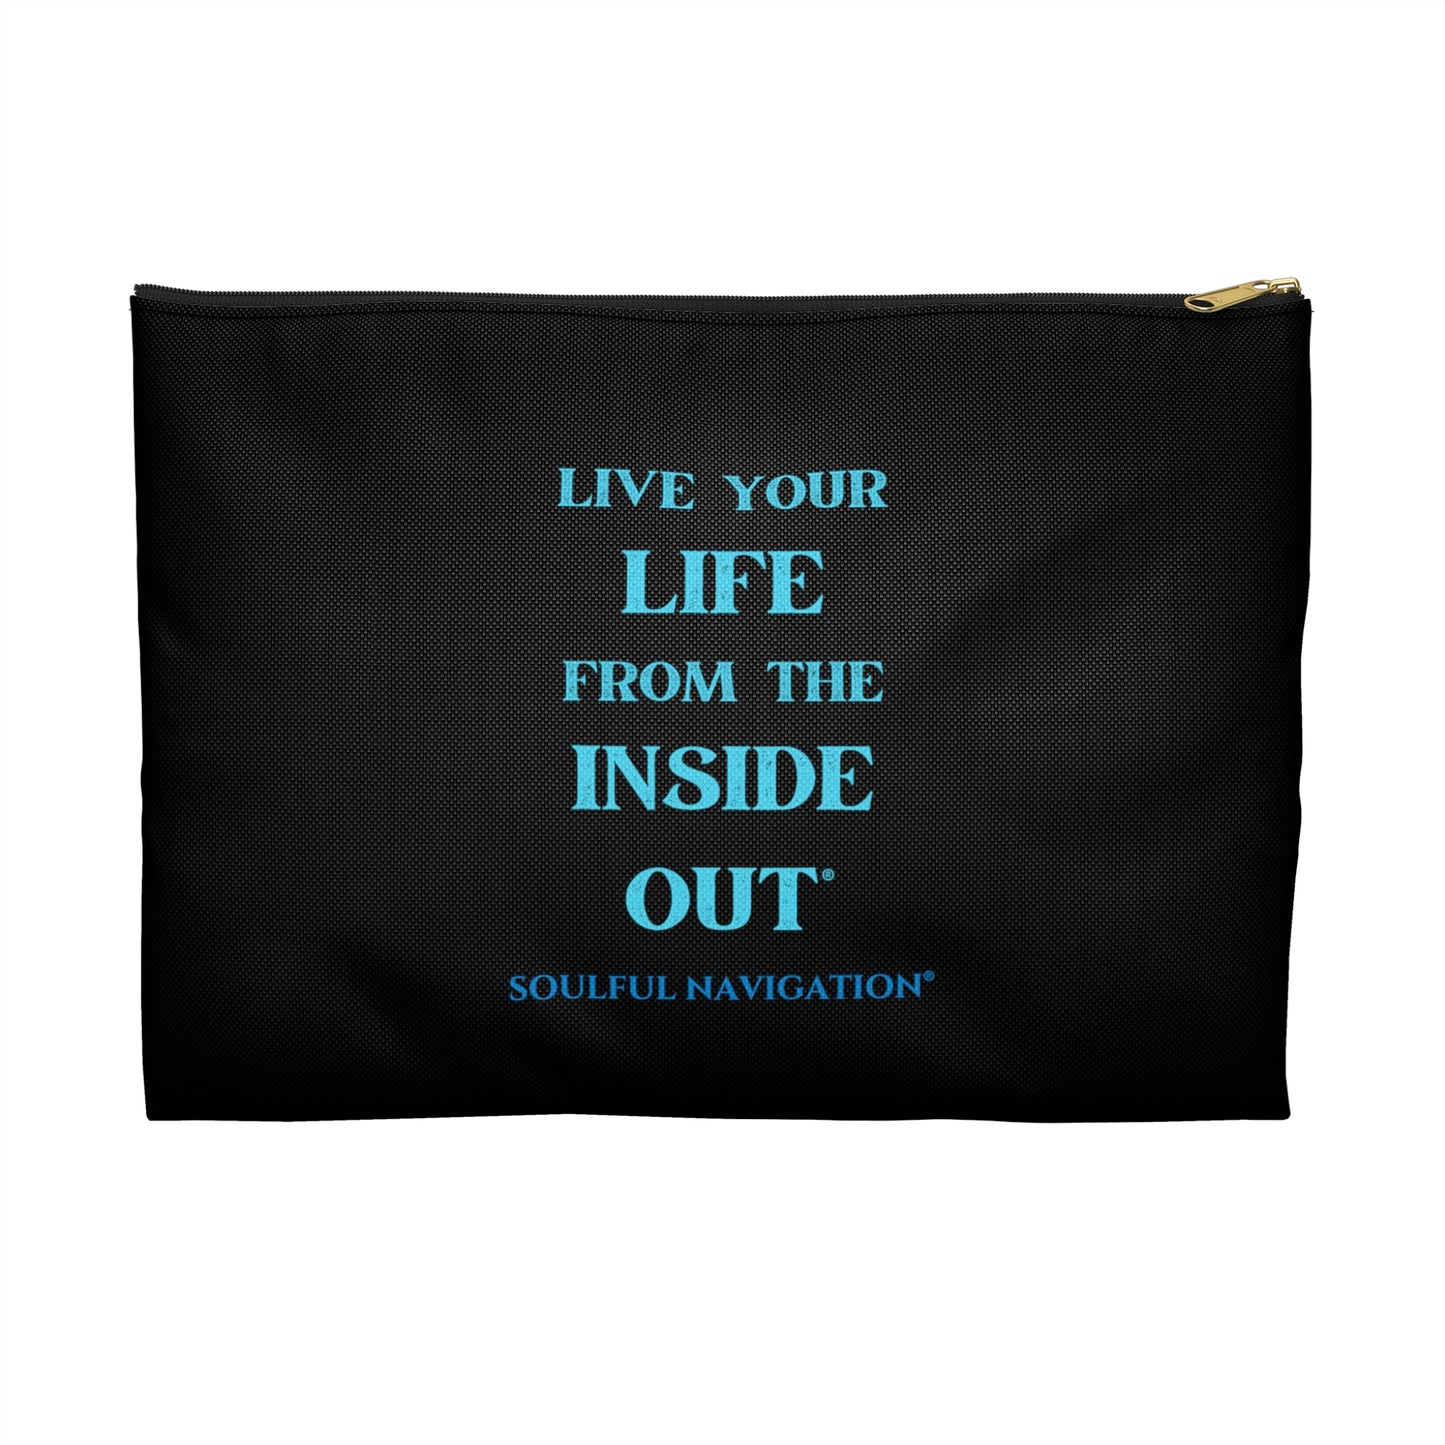 "LIVE YOUR LIFE FROM THE INSIDE OUT" Accessory Pouches